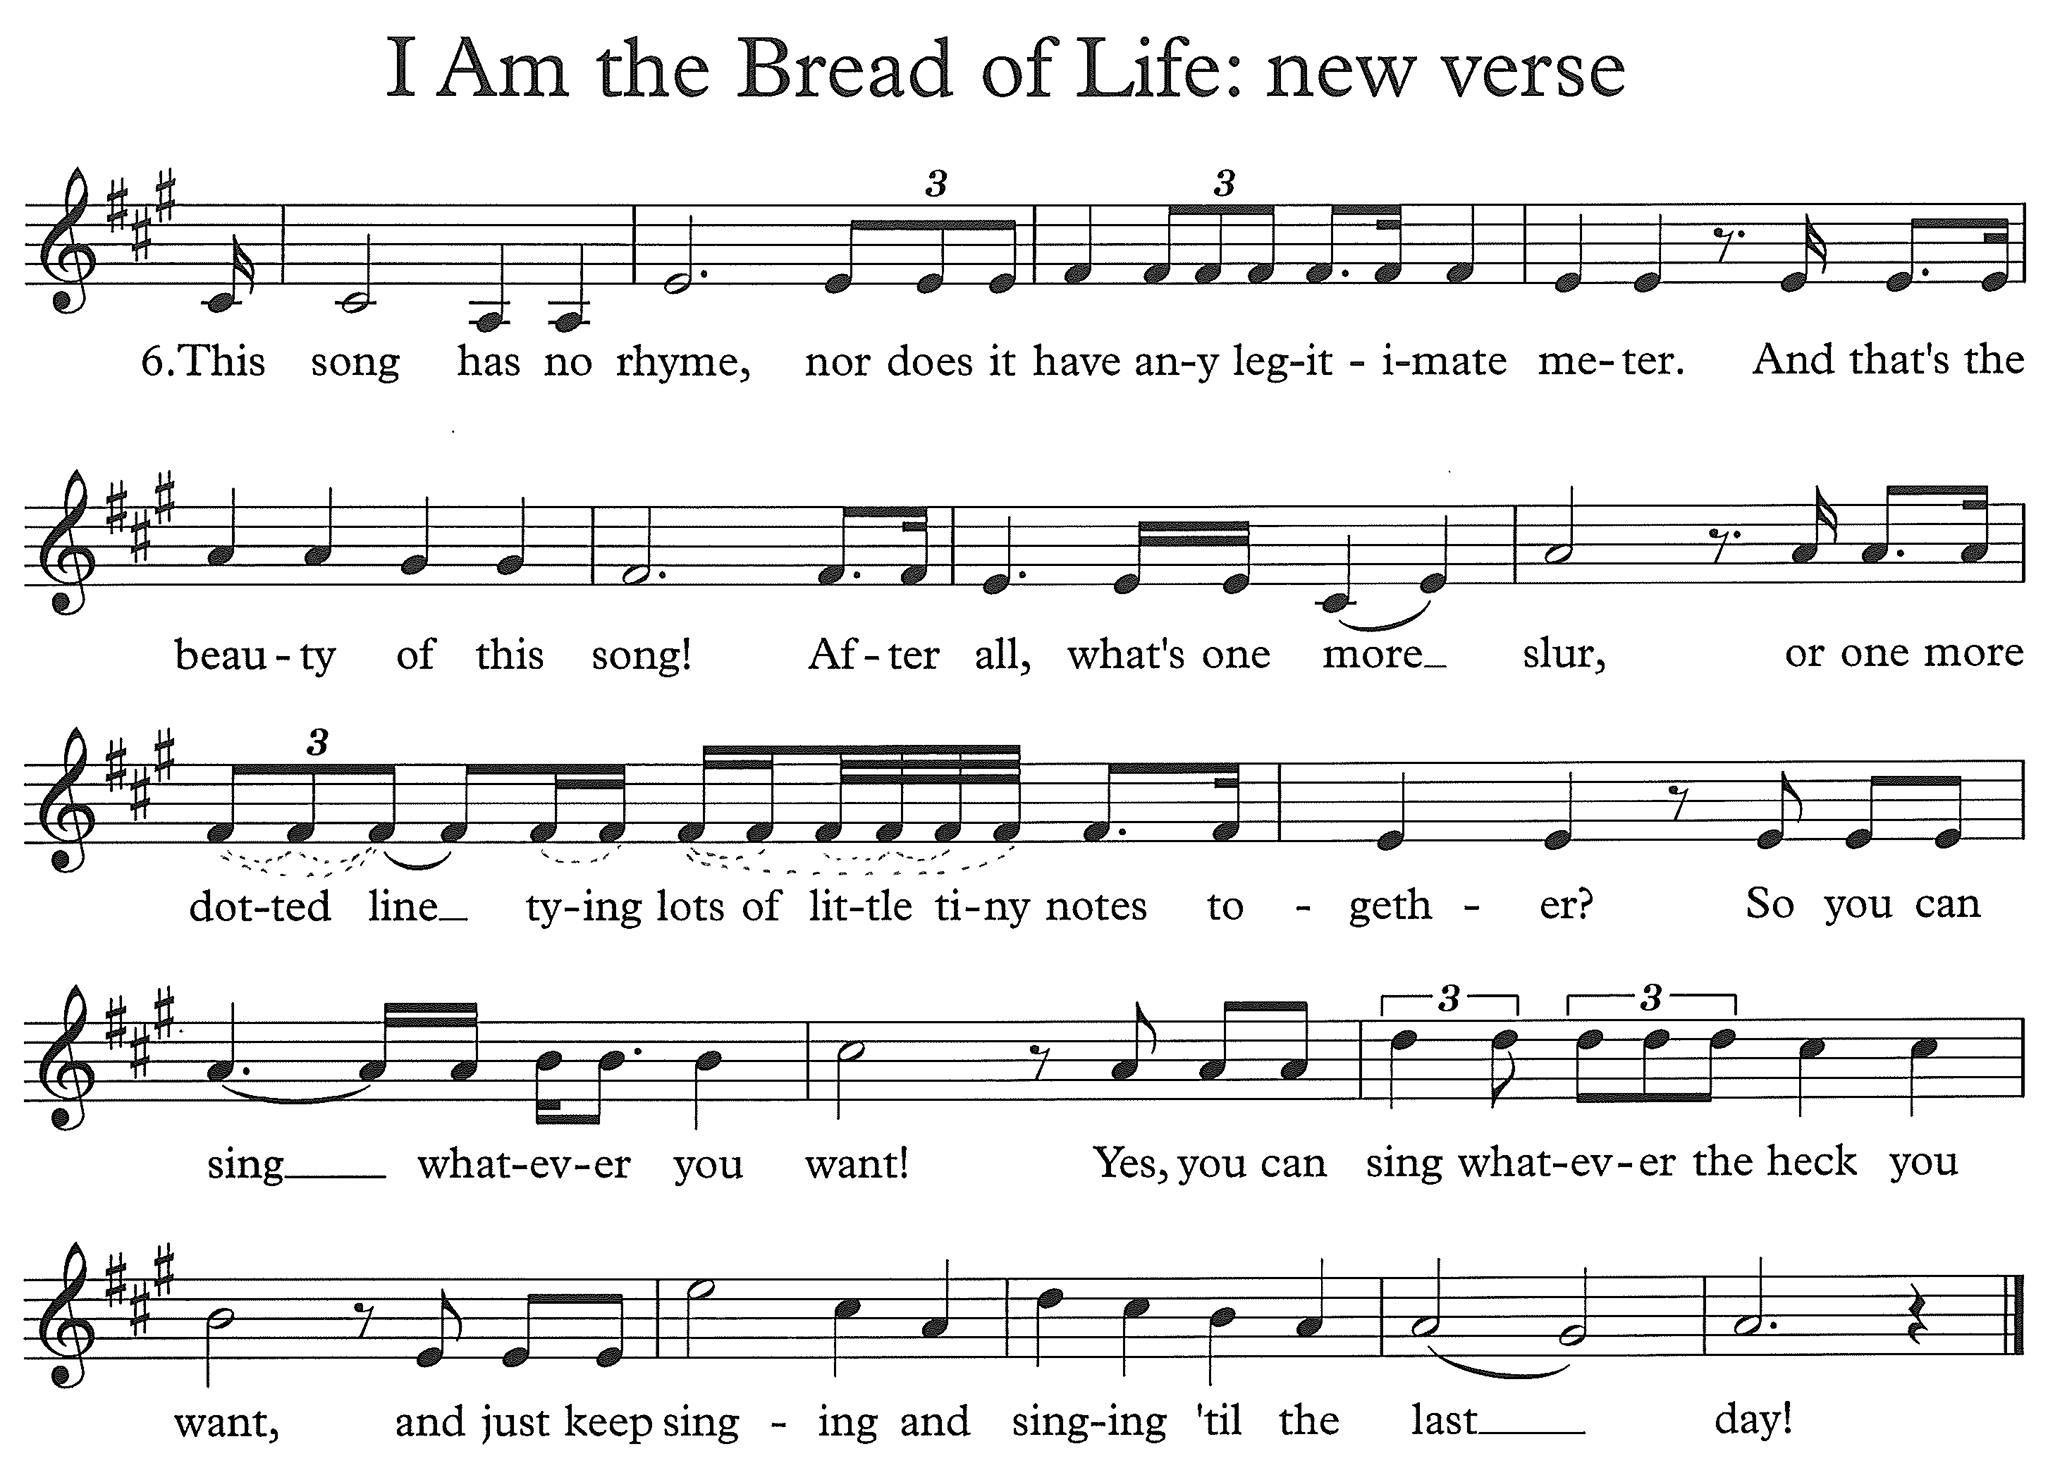 15_08_31 I am the bread of life verse